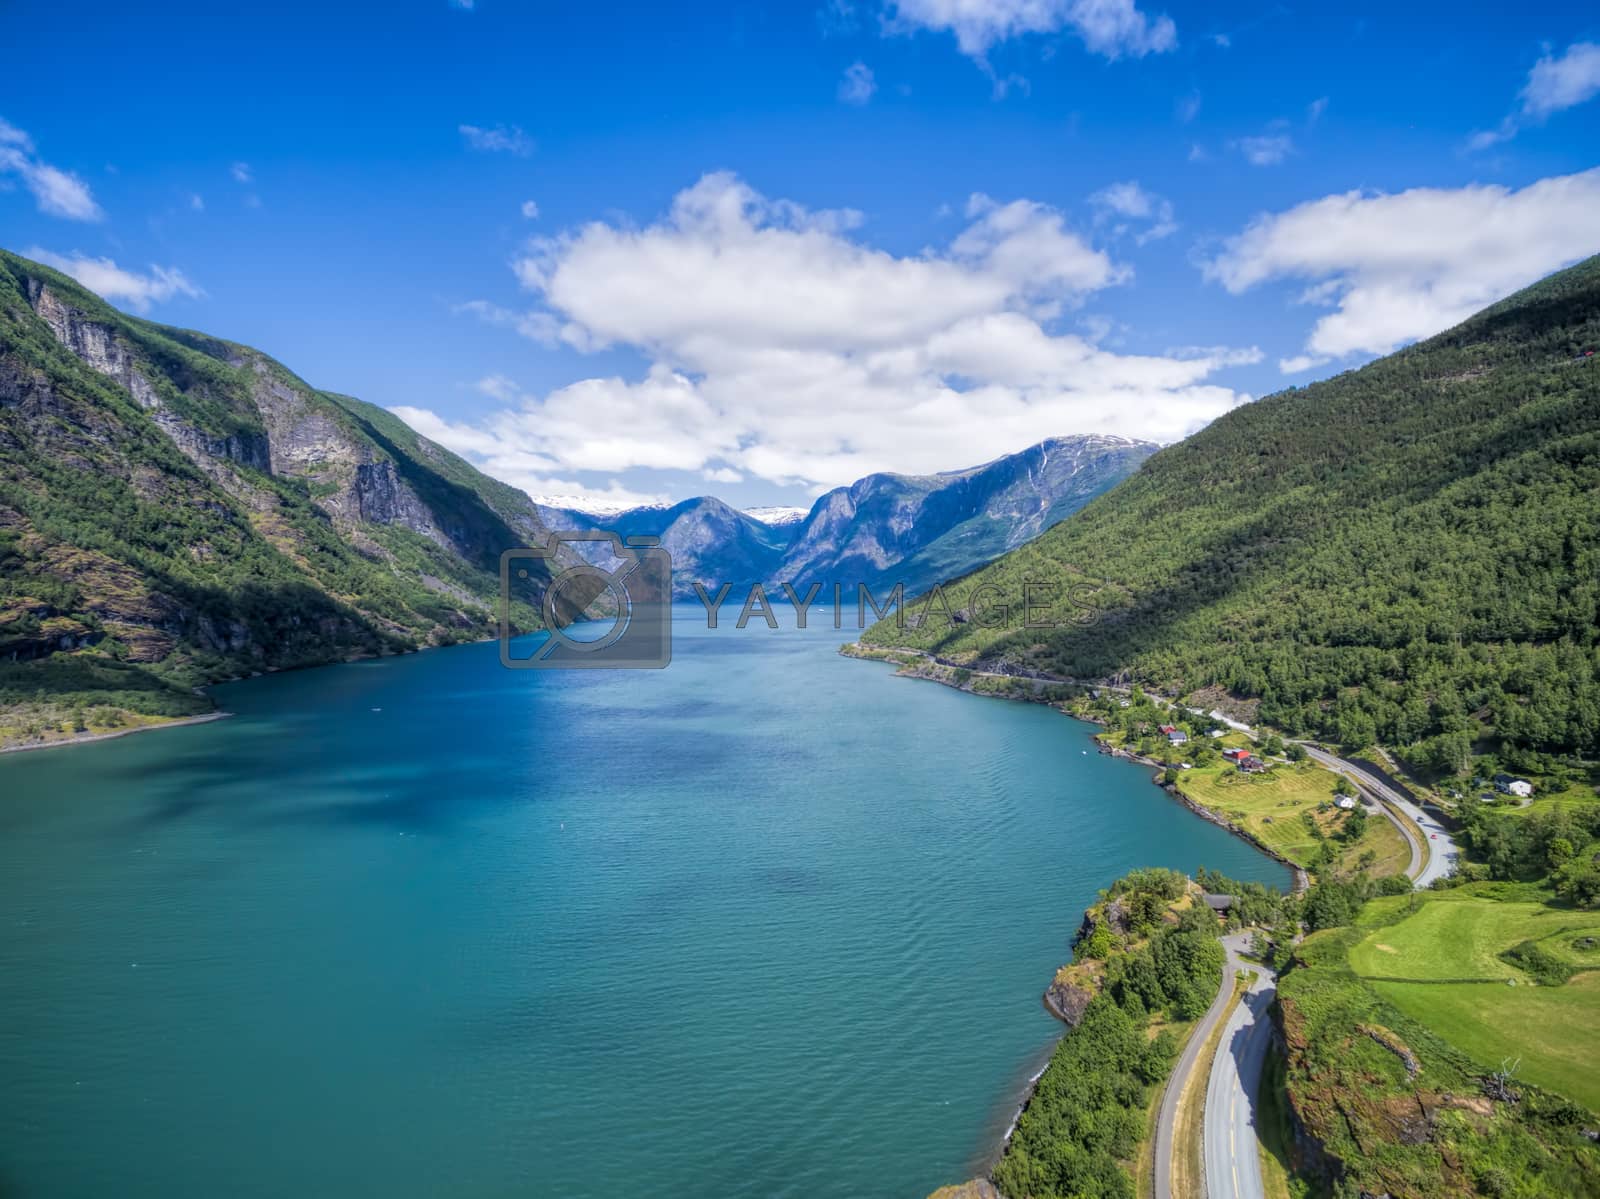 Royalty free image of Aurlandsfjorden by Harvepino